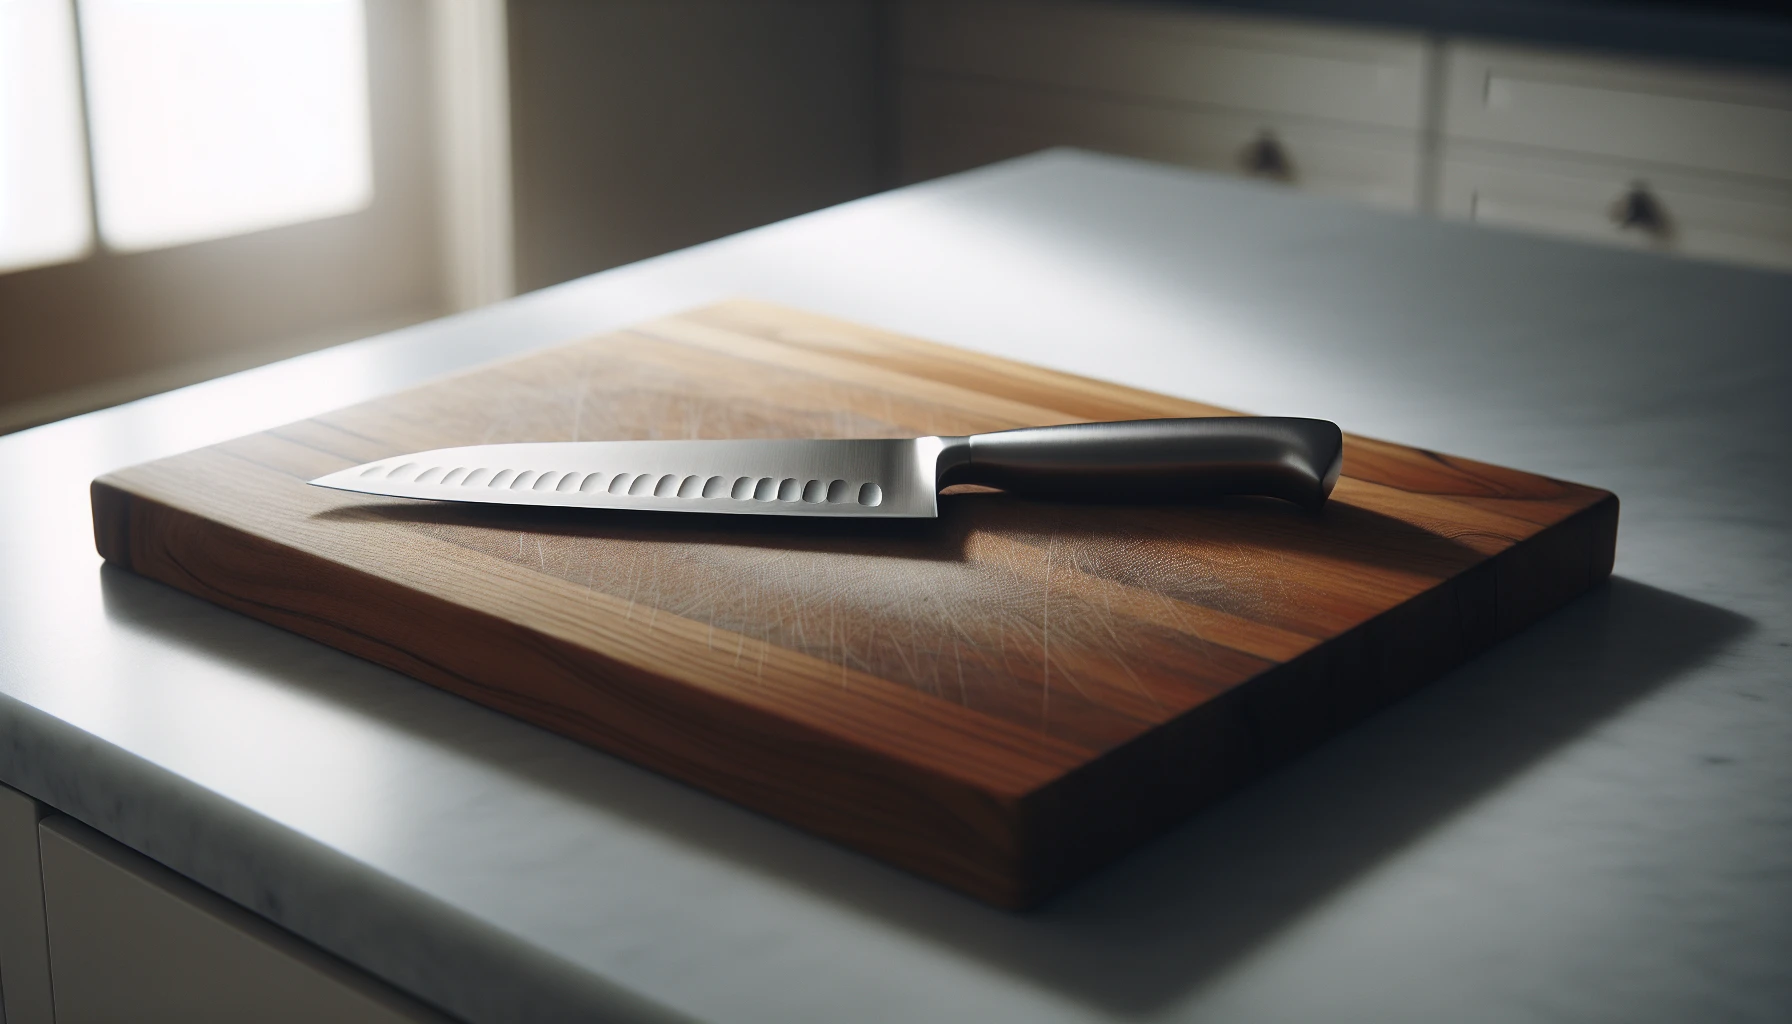 Chef's knife and cutting board